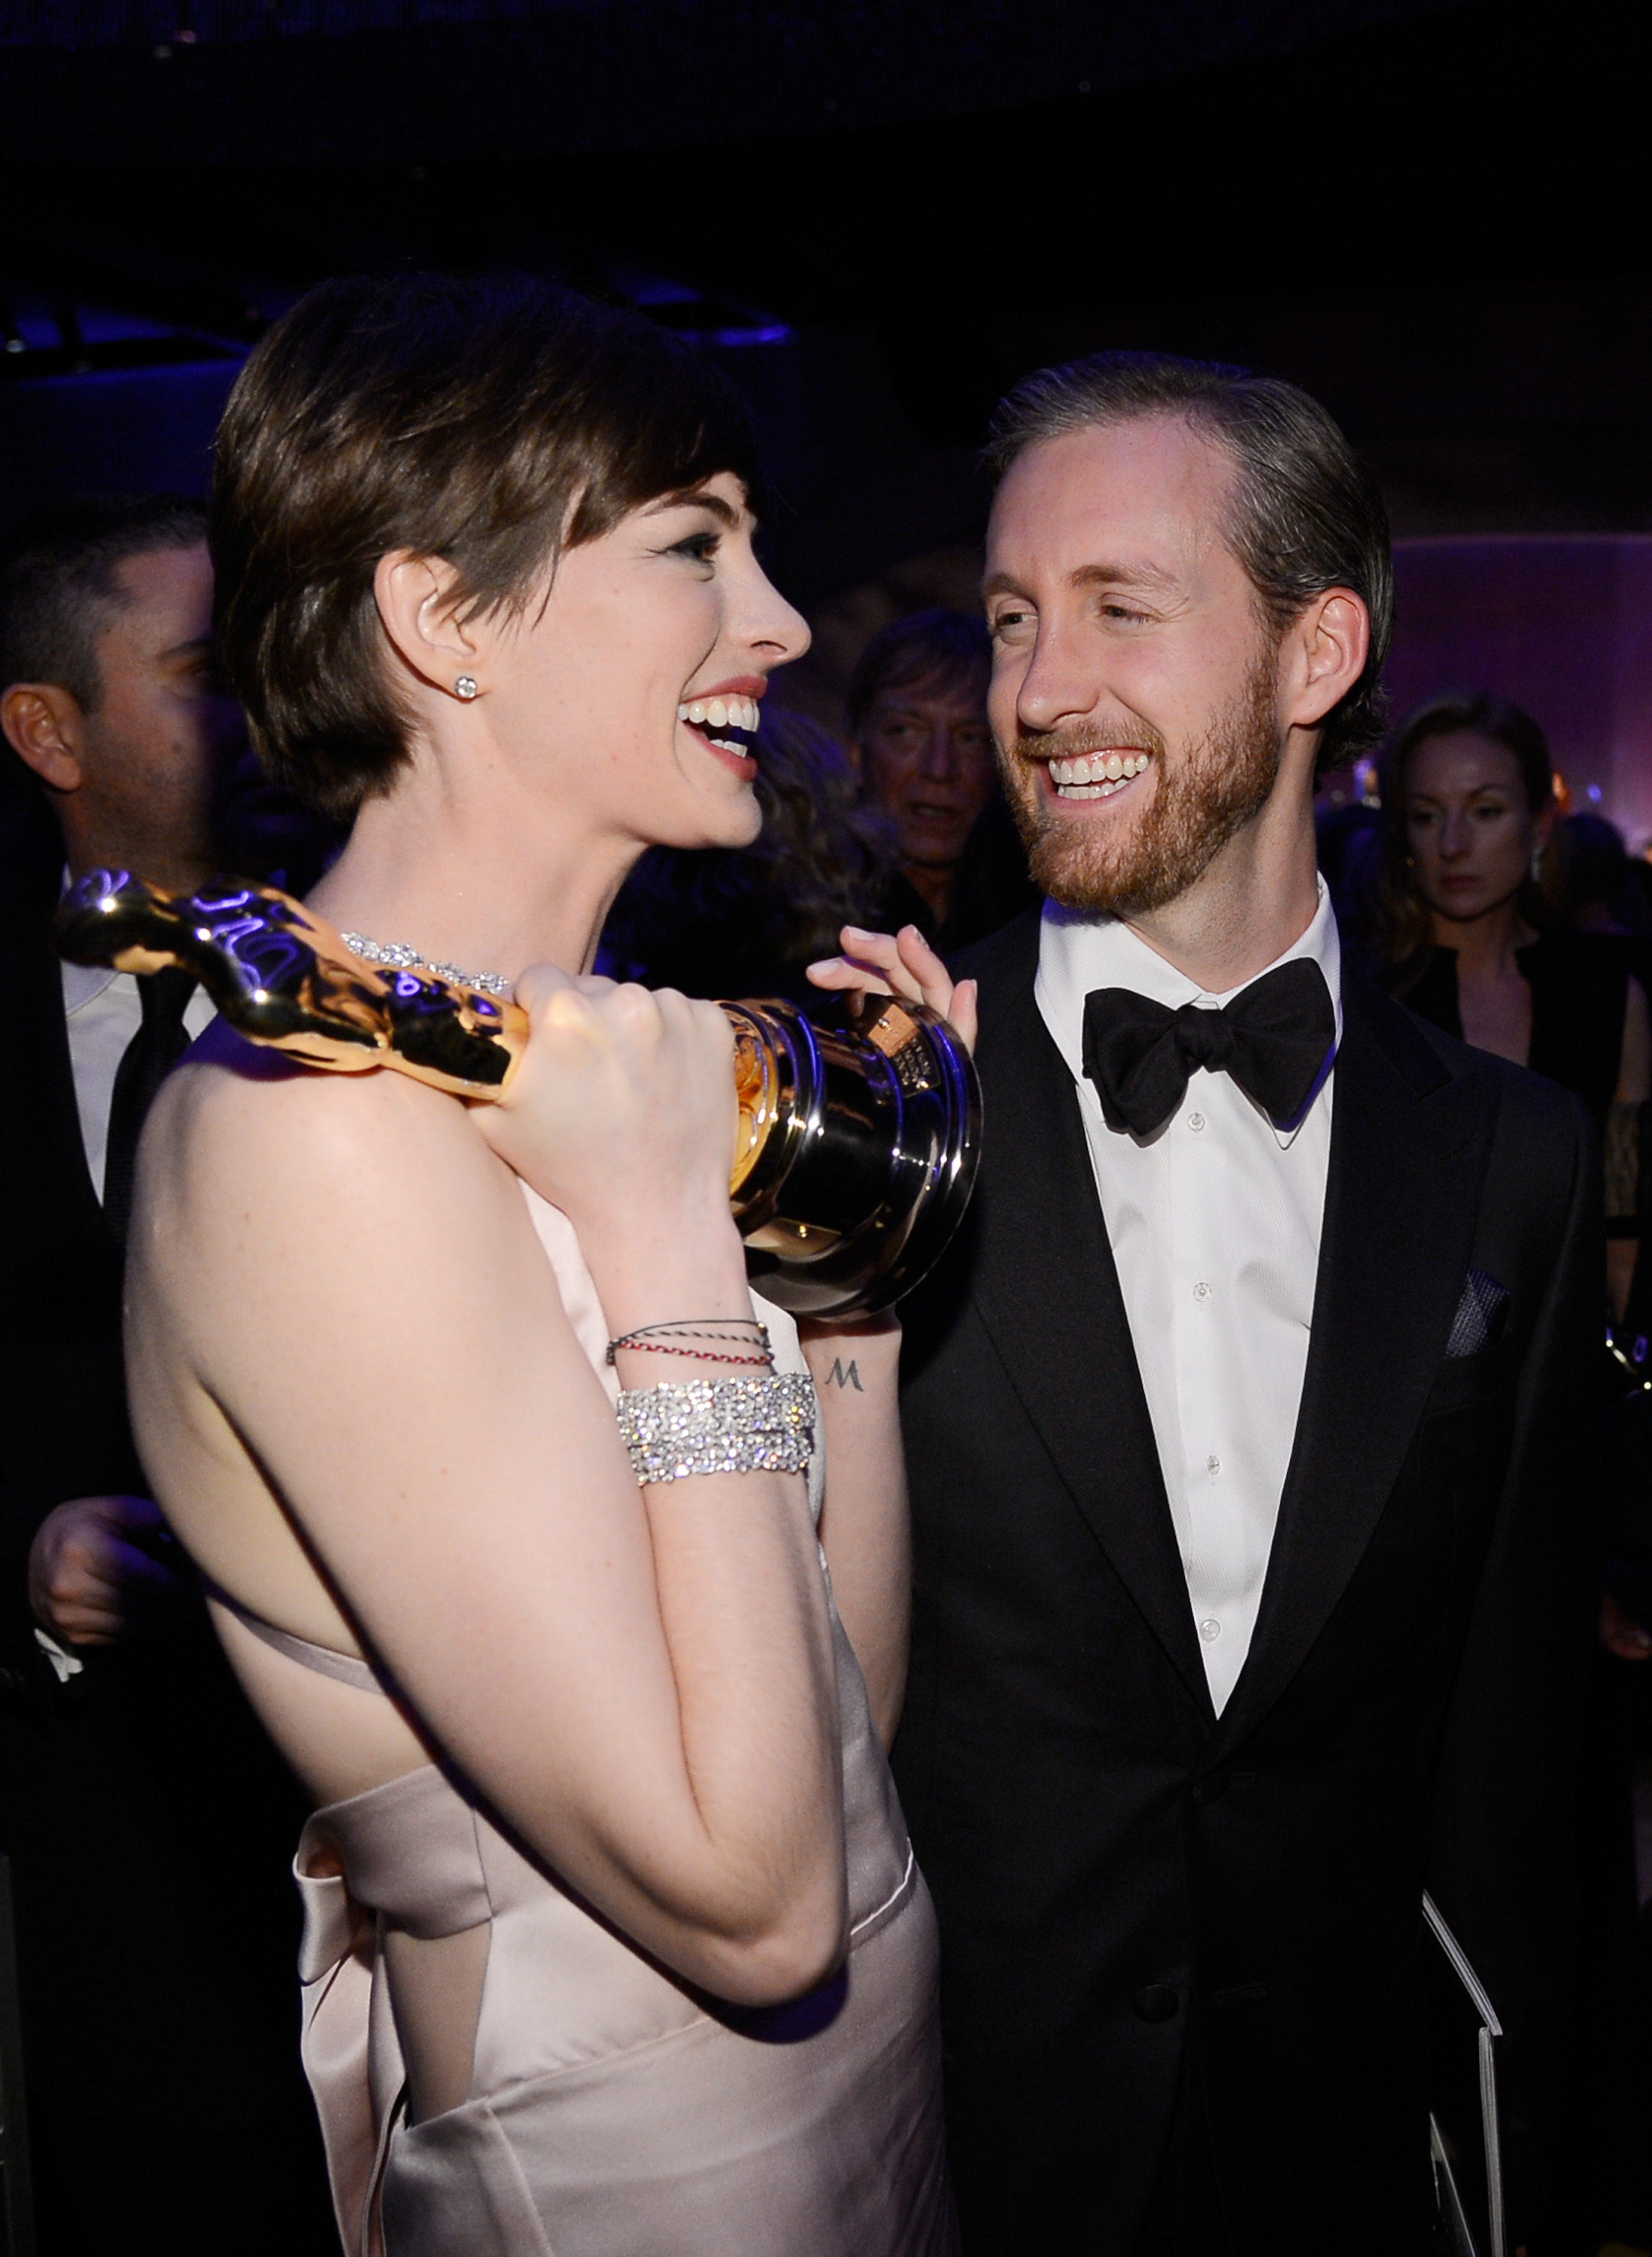 Adam Shulman, Anne Hathaway's Husband: 5 Facts You Need To Know